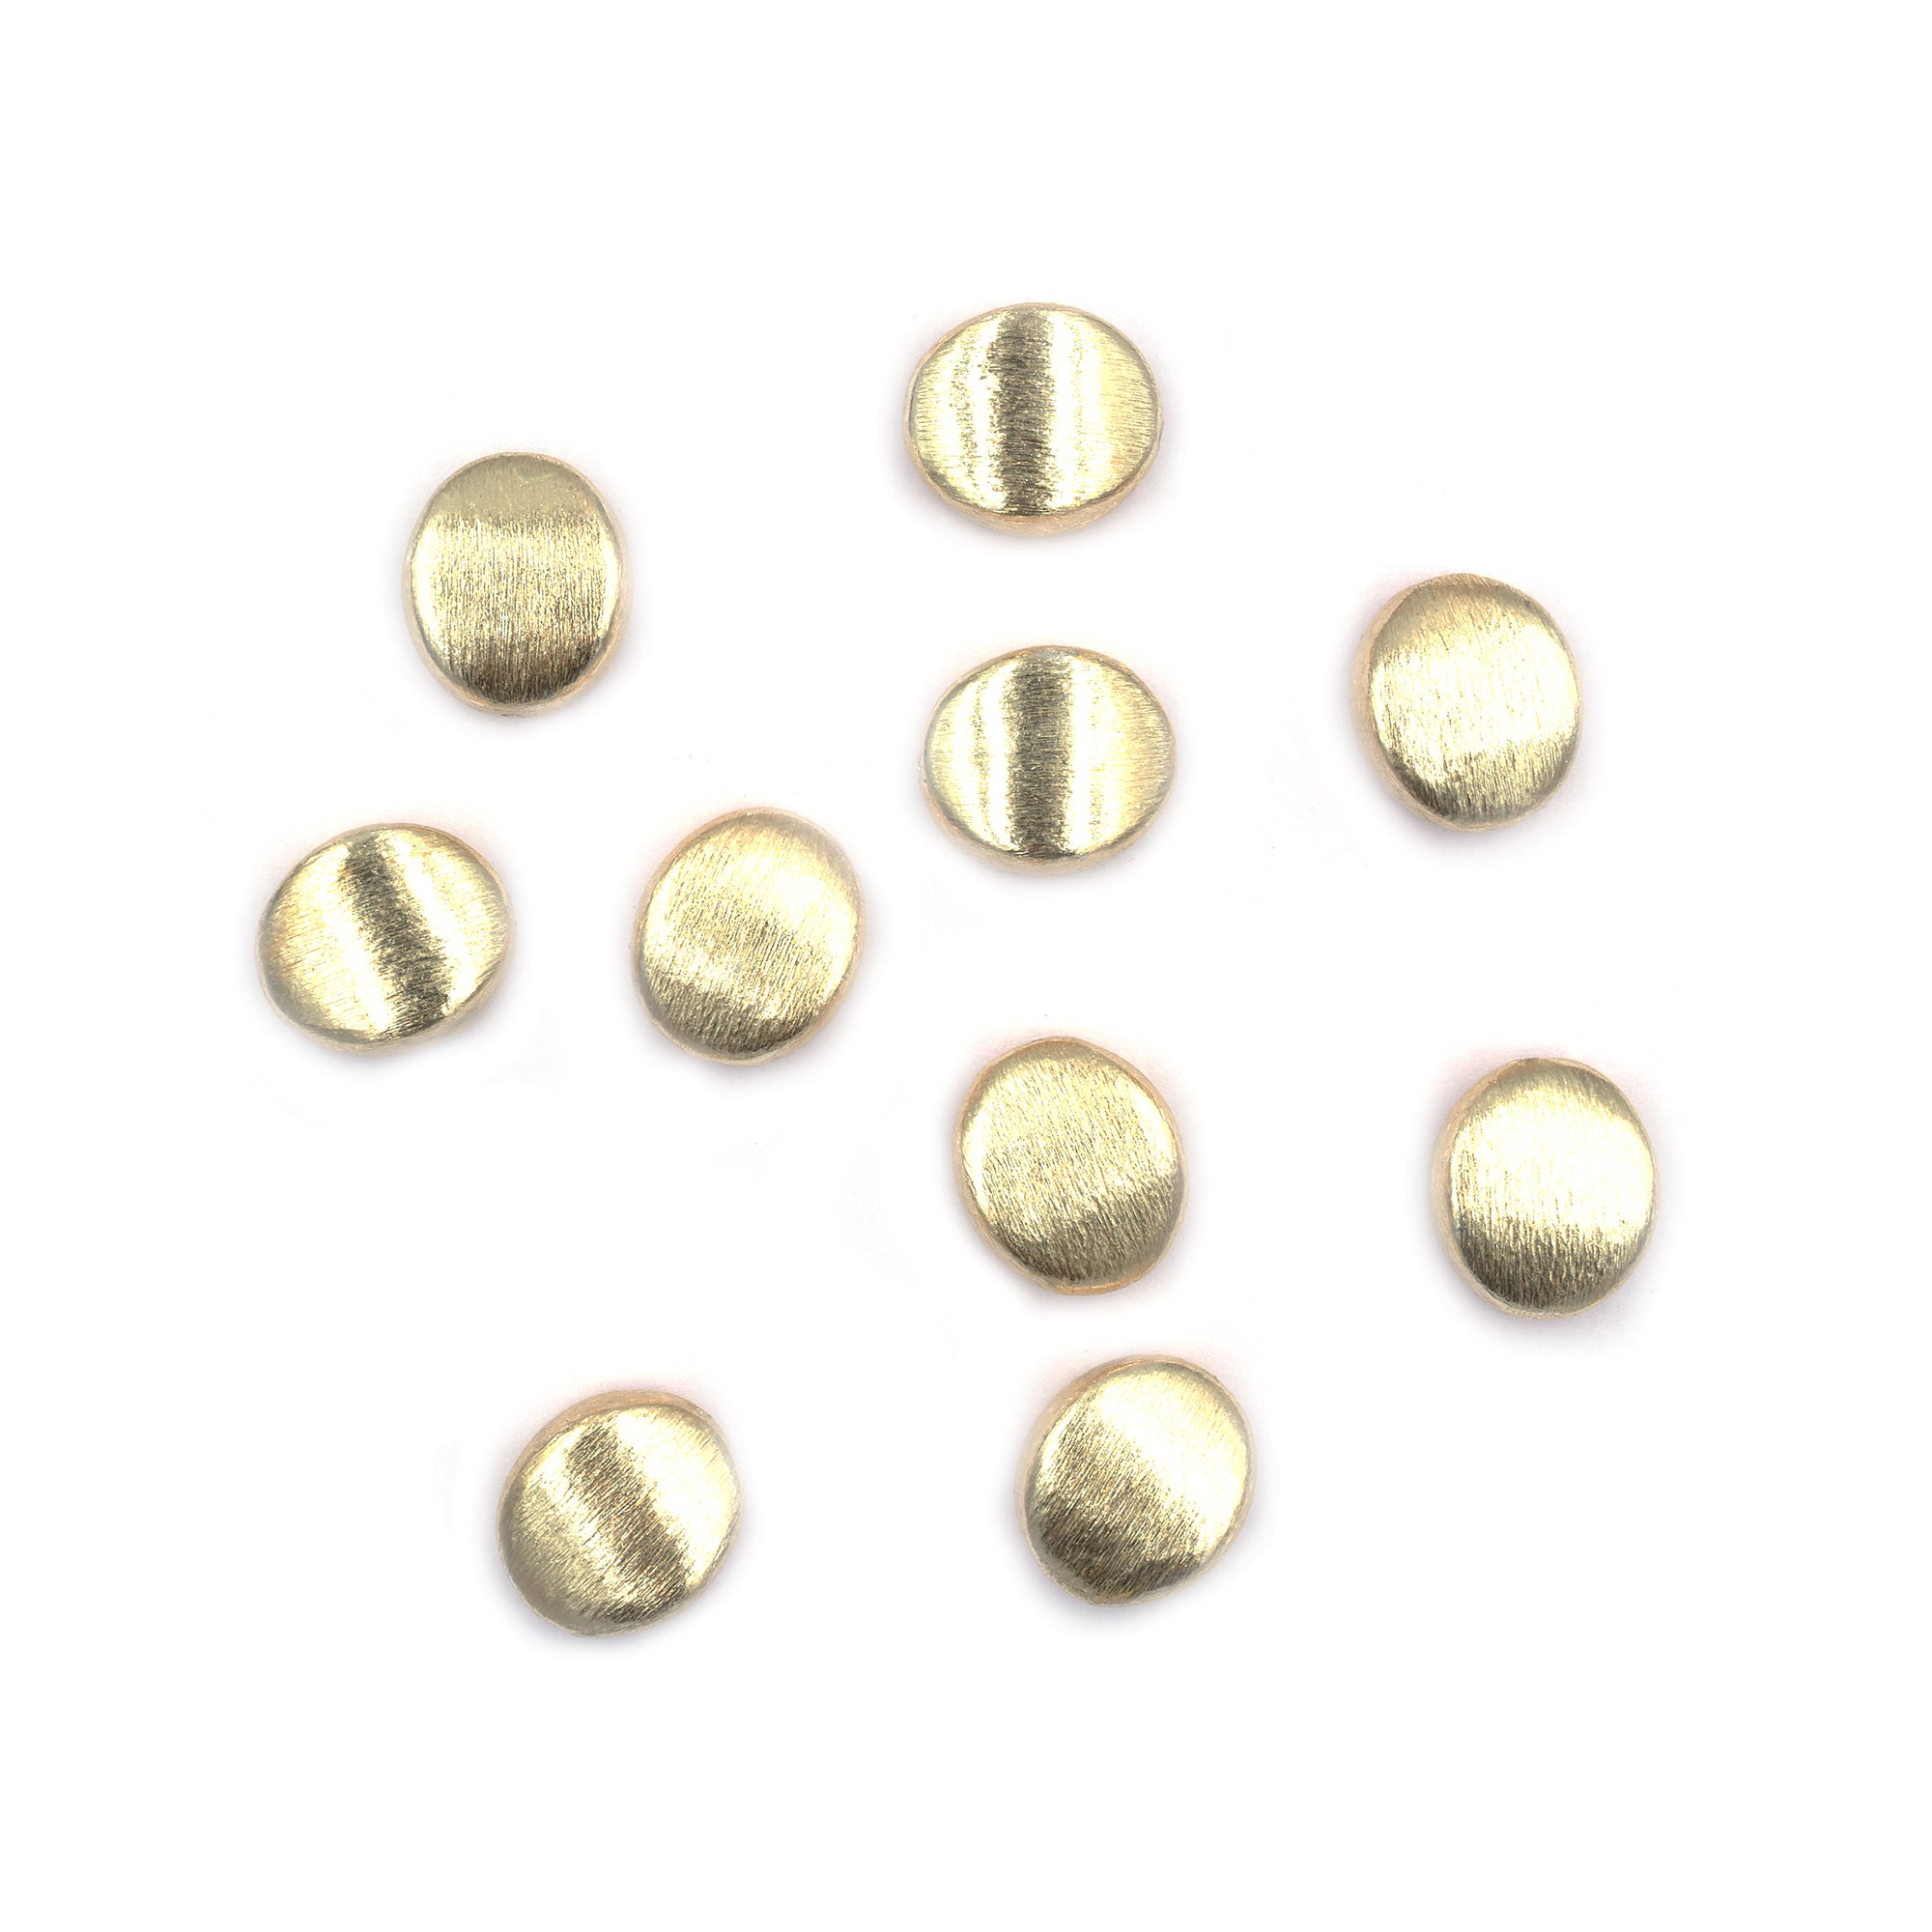 10 Pcs 16mm Oval Brushed Matte Finish Beads Gold Plated Copper